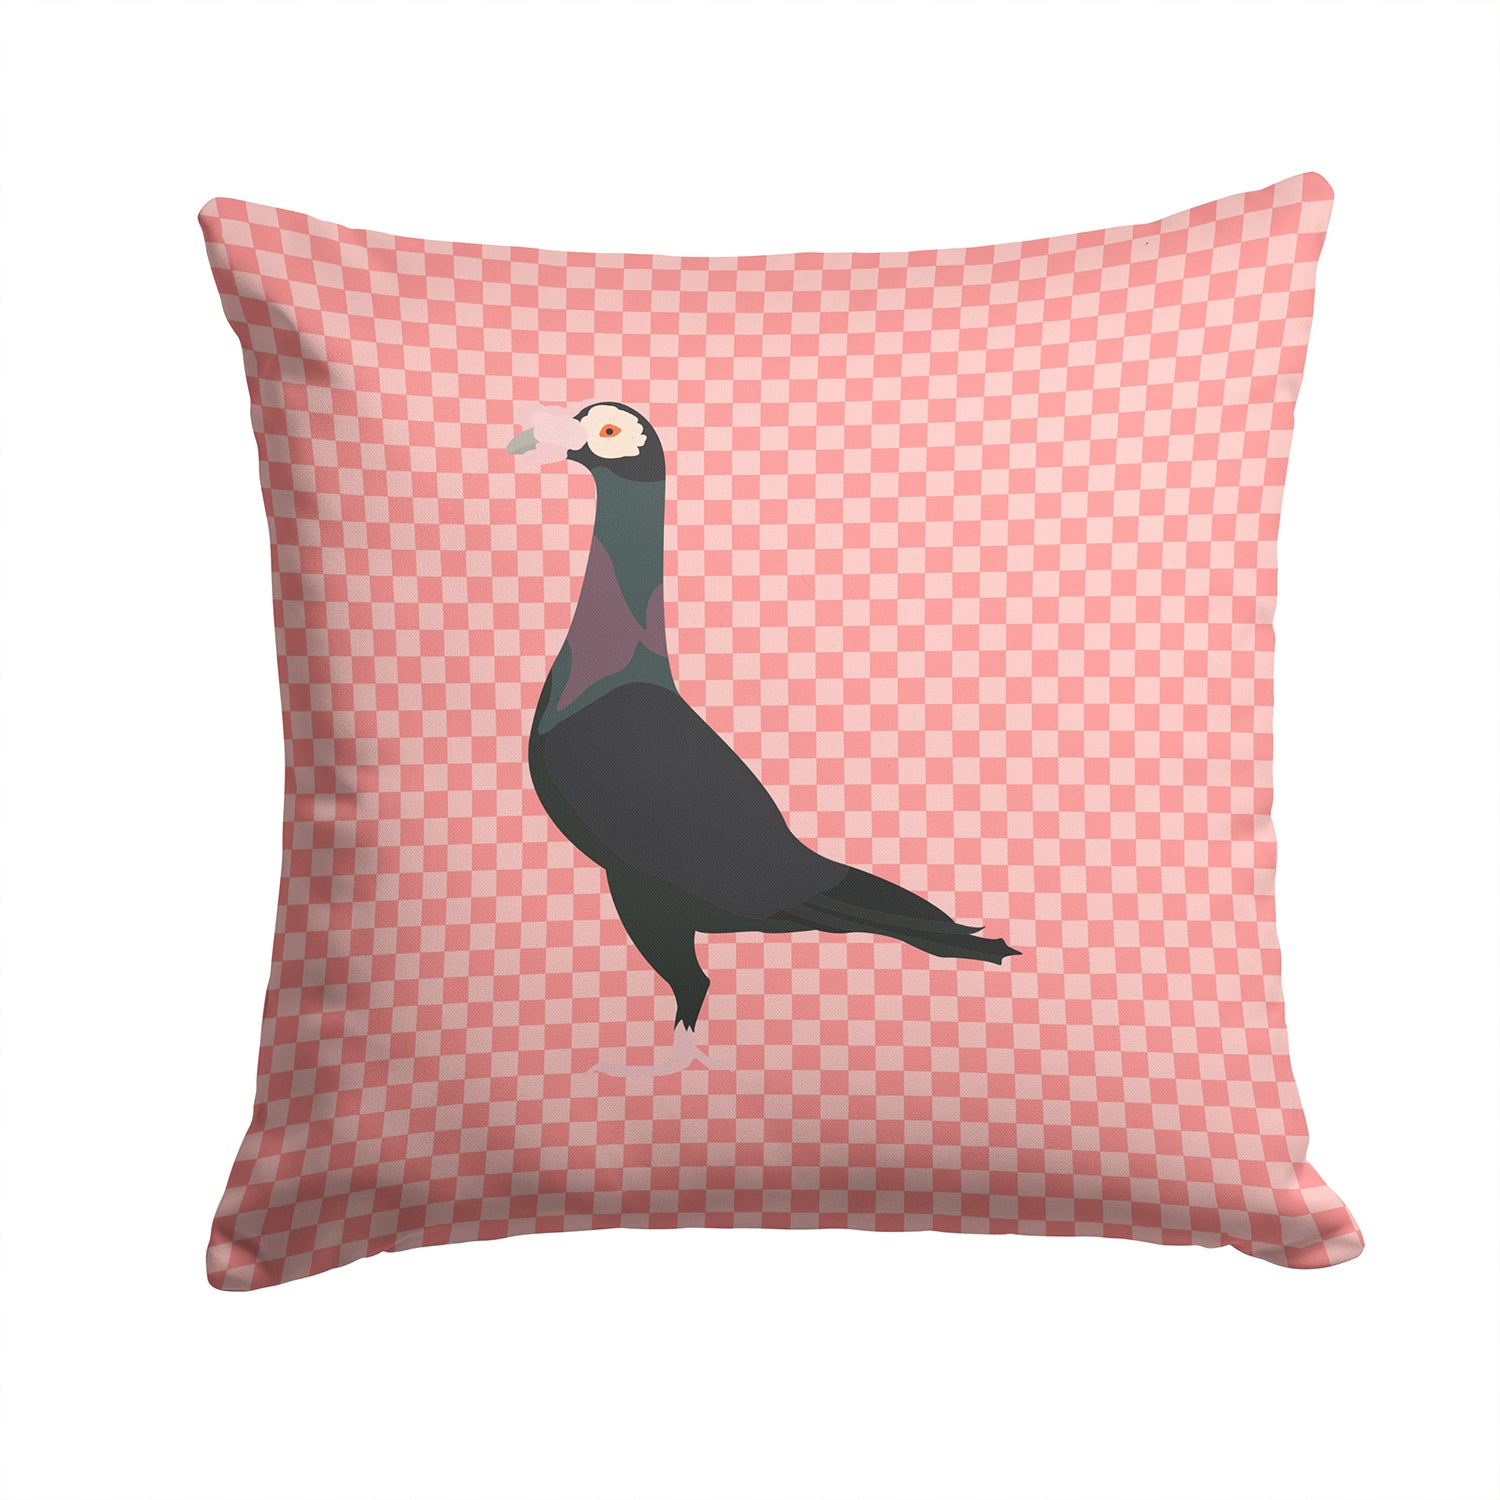 English Carrier Pigeon Pink Check Fabric Decorative Pillow BB7945PW1414 - the-store.com